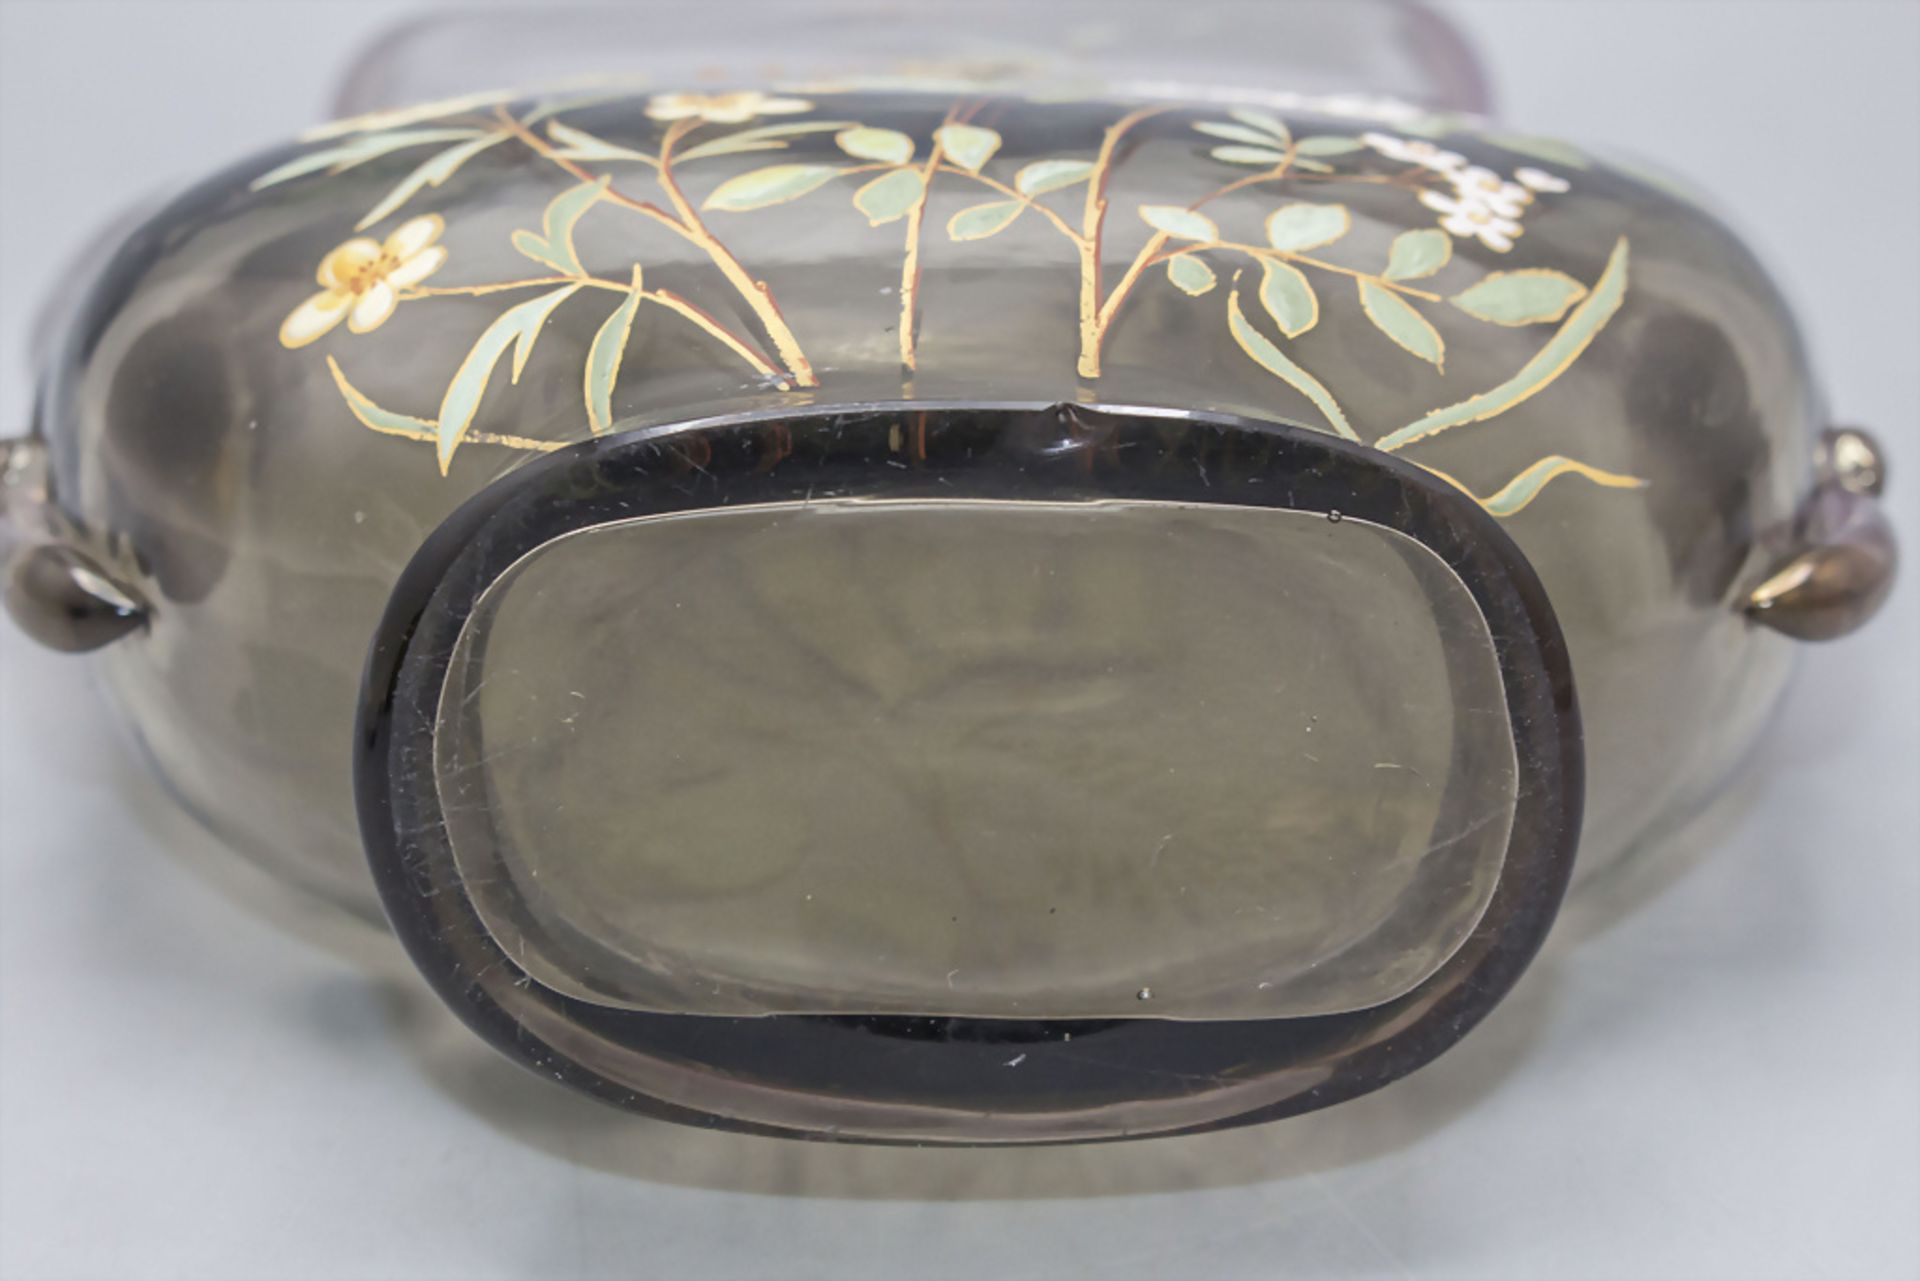 Jugendstil Vase mit Schmetterling / An Art Nouveau glass vase with handles and a swallowtail ... - Image 4 of 4